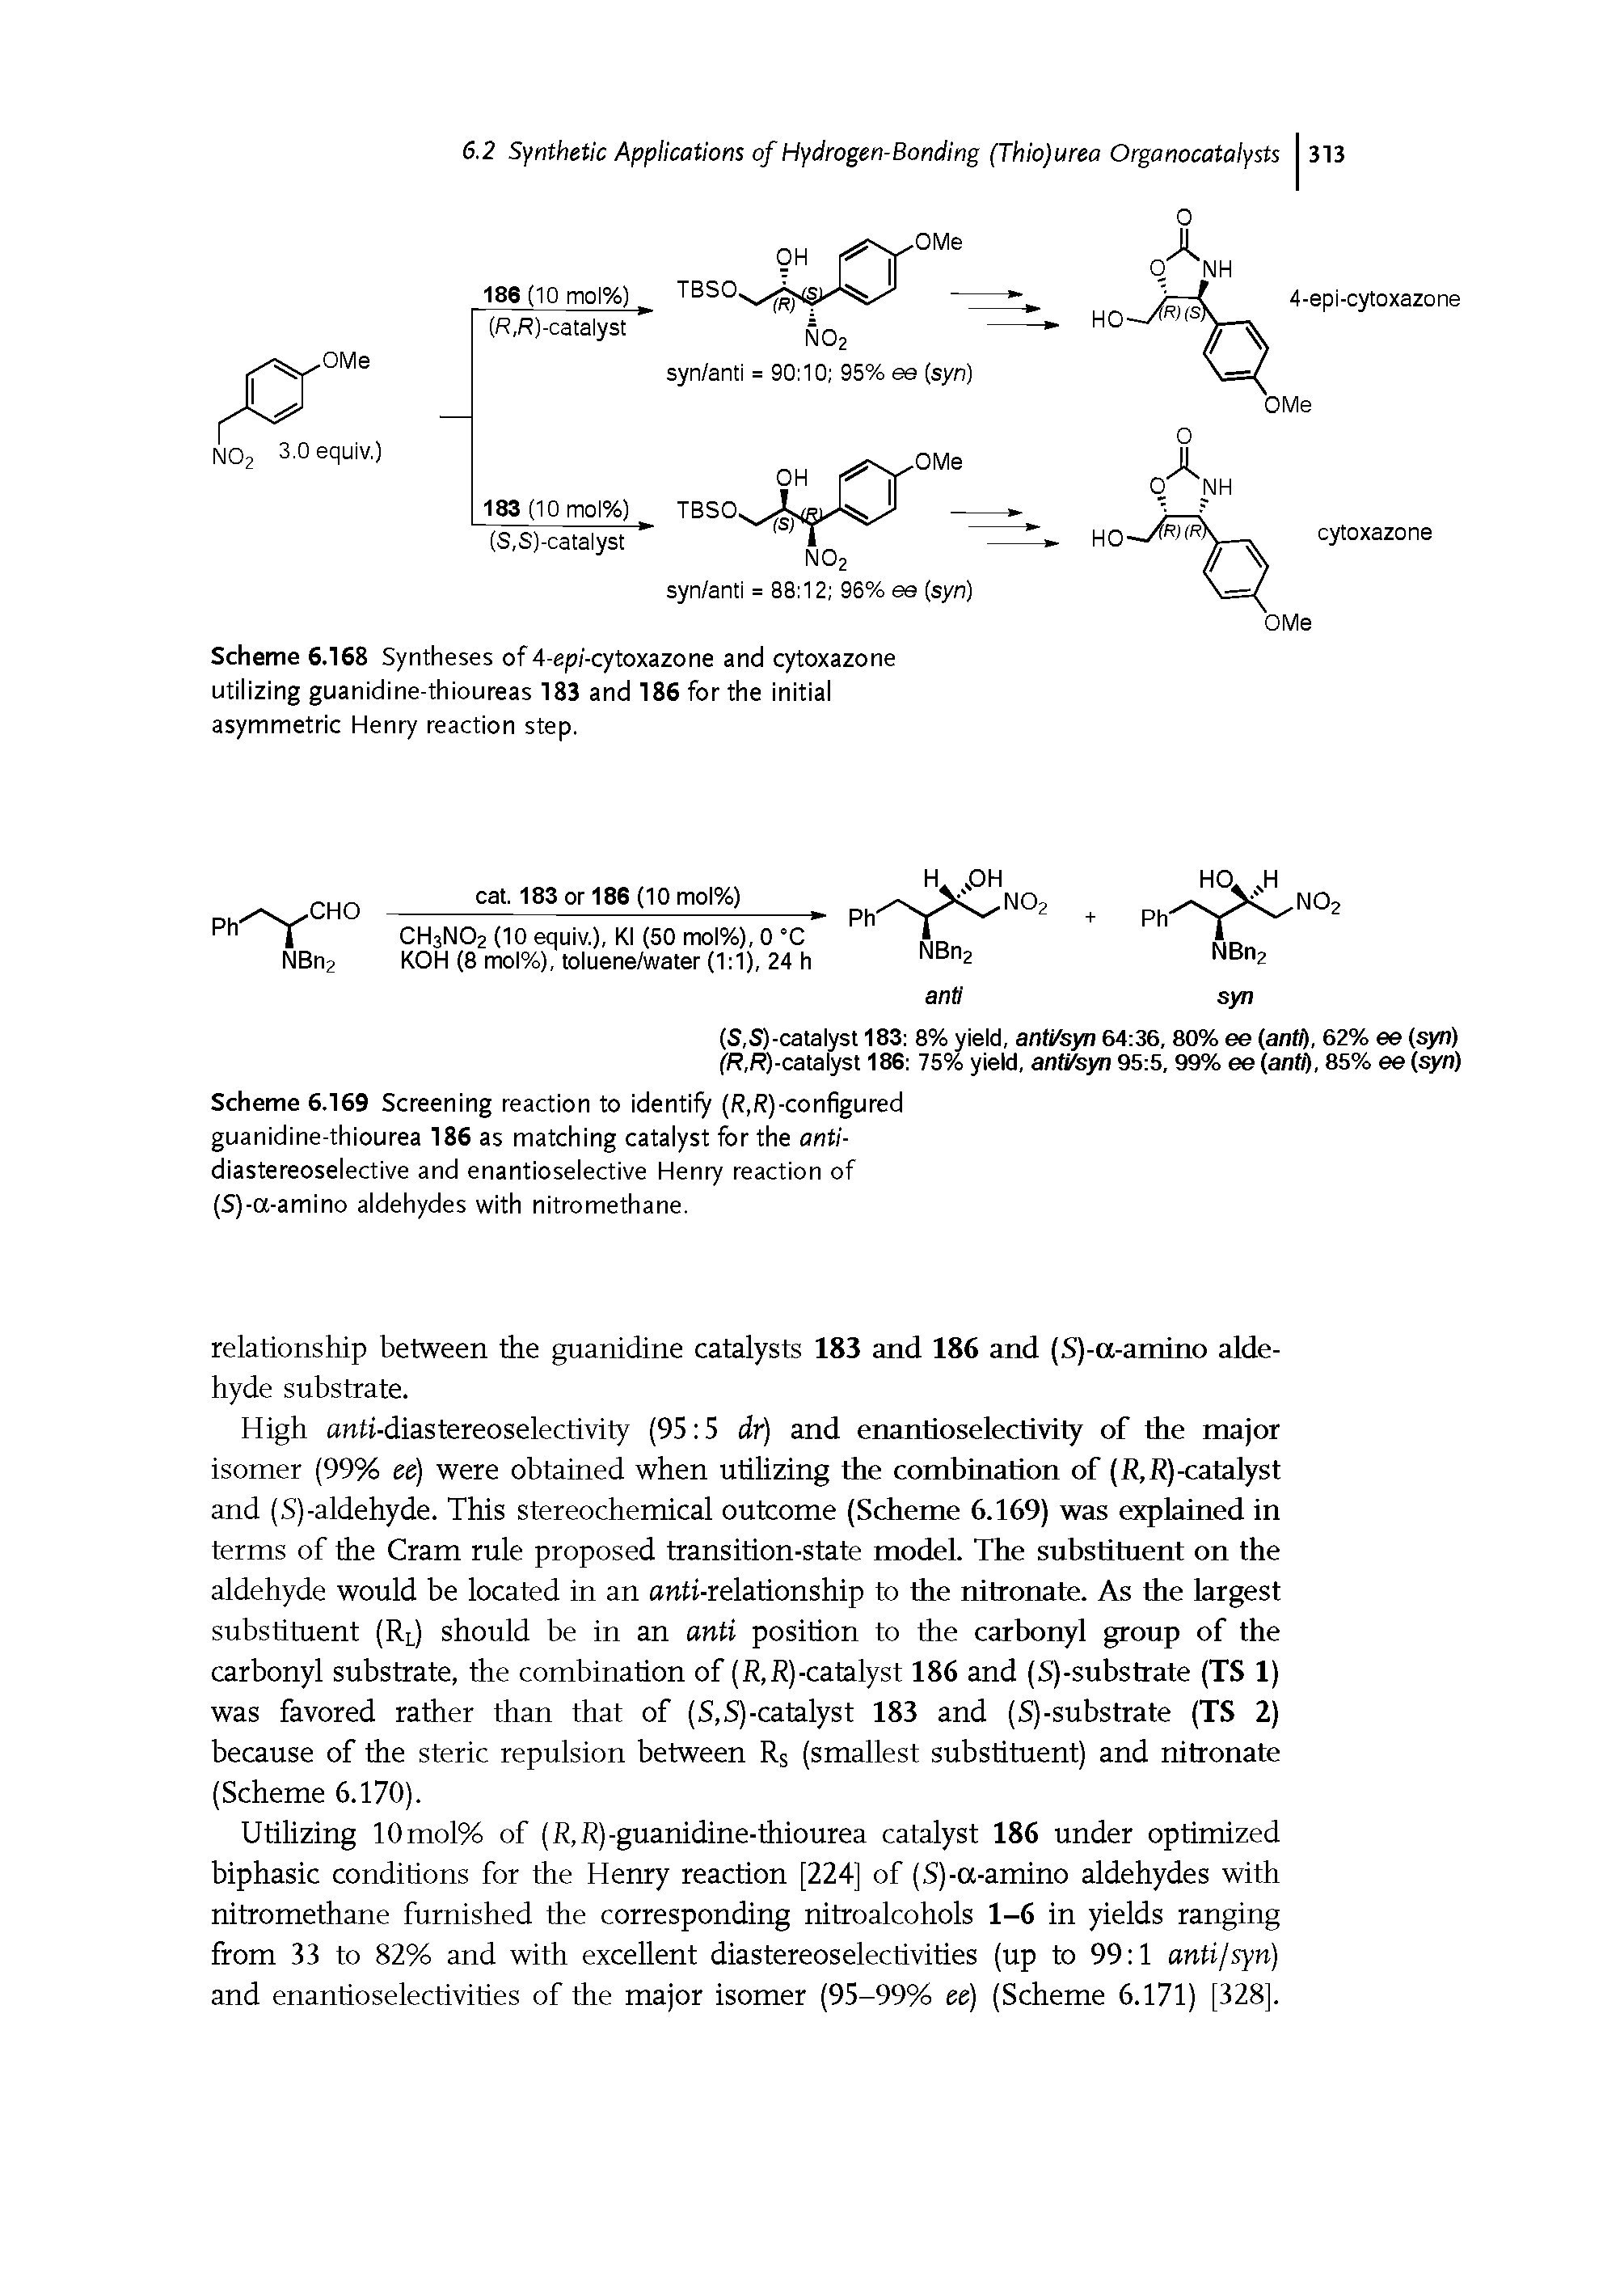 Scheme 6.169 Screening reaction to identify (R,R)-configured guanidine-thiourea 186 as matching catalyst for the anti-diastereoselective and enantioselective Henry reaction of (S)-a-amino aldehydes with nitromethane.